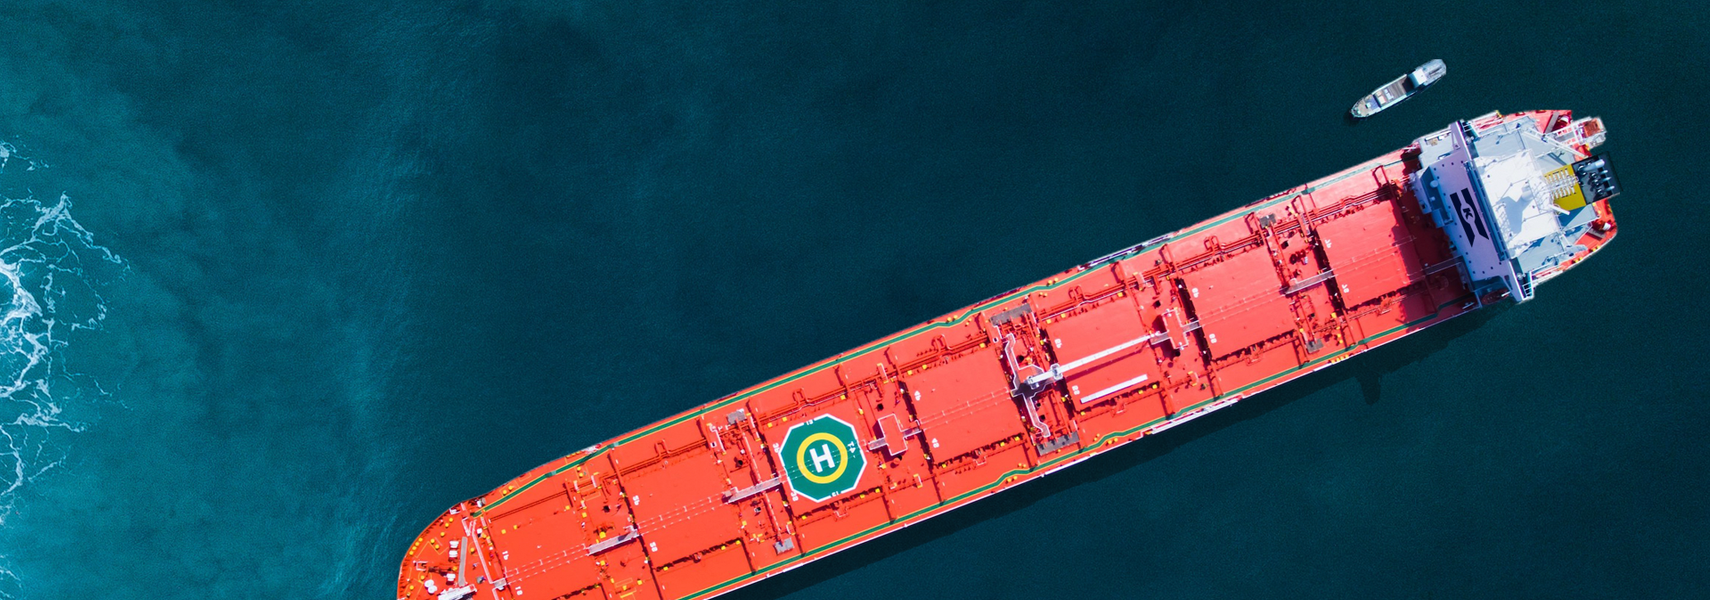 Klaveness Ship Management expands contract with Veracity by DNV GL